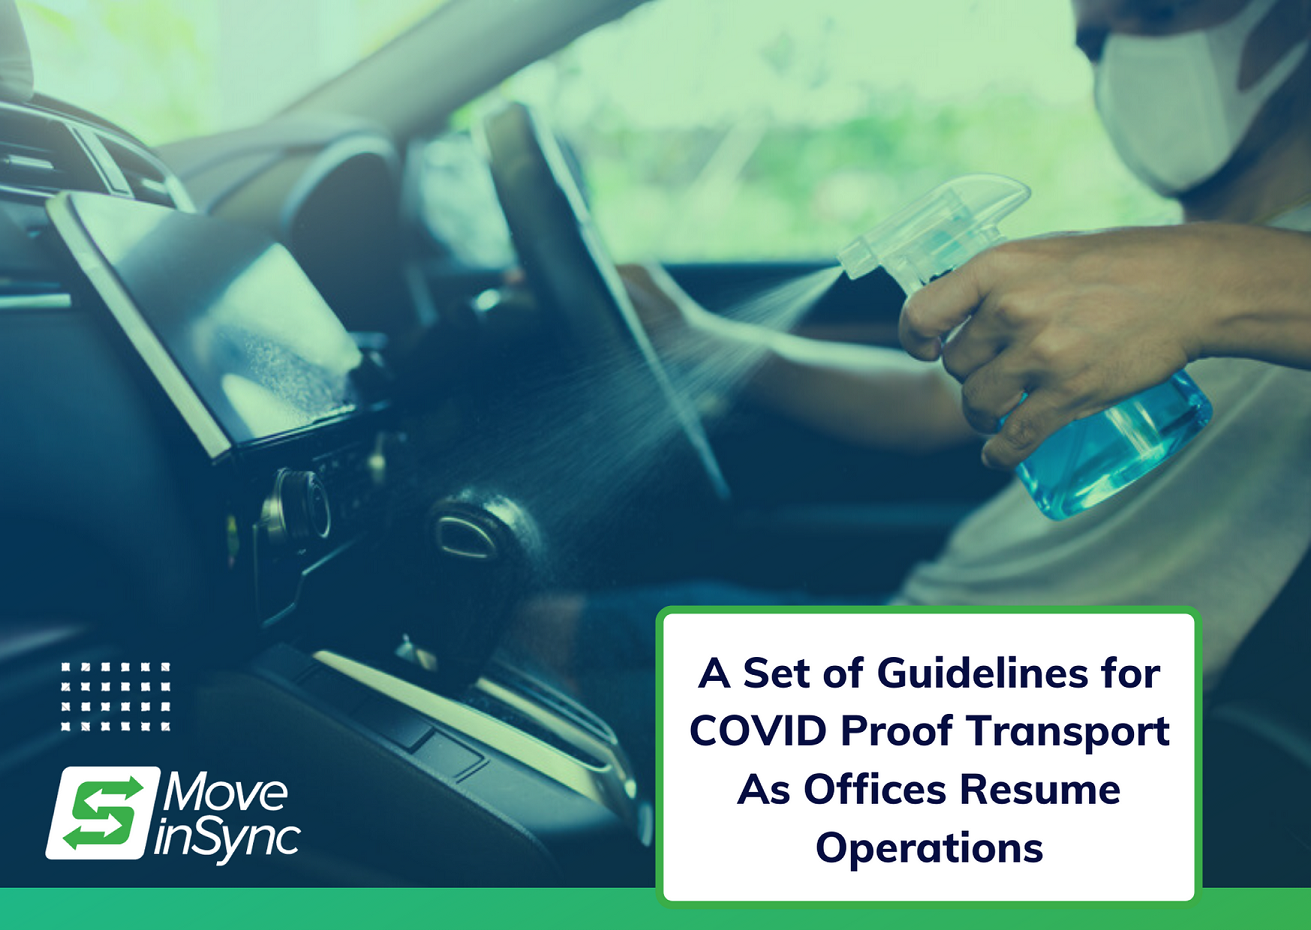 A Set of Guidelines for COVID Proof Transport As Offices Resume Operations